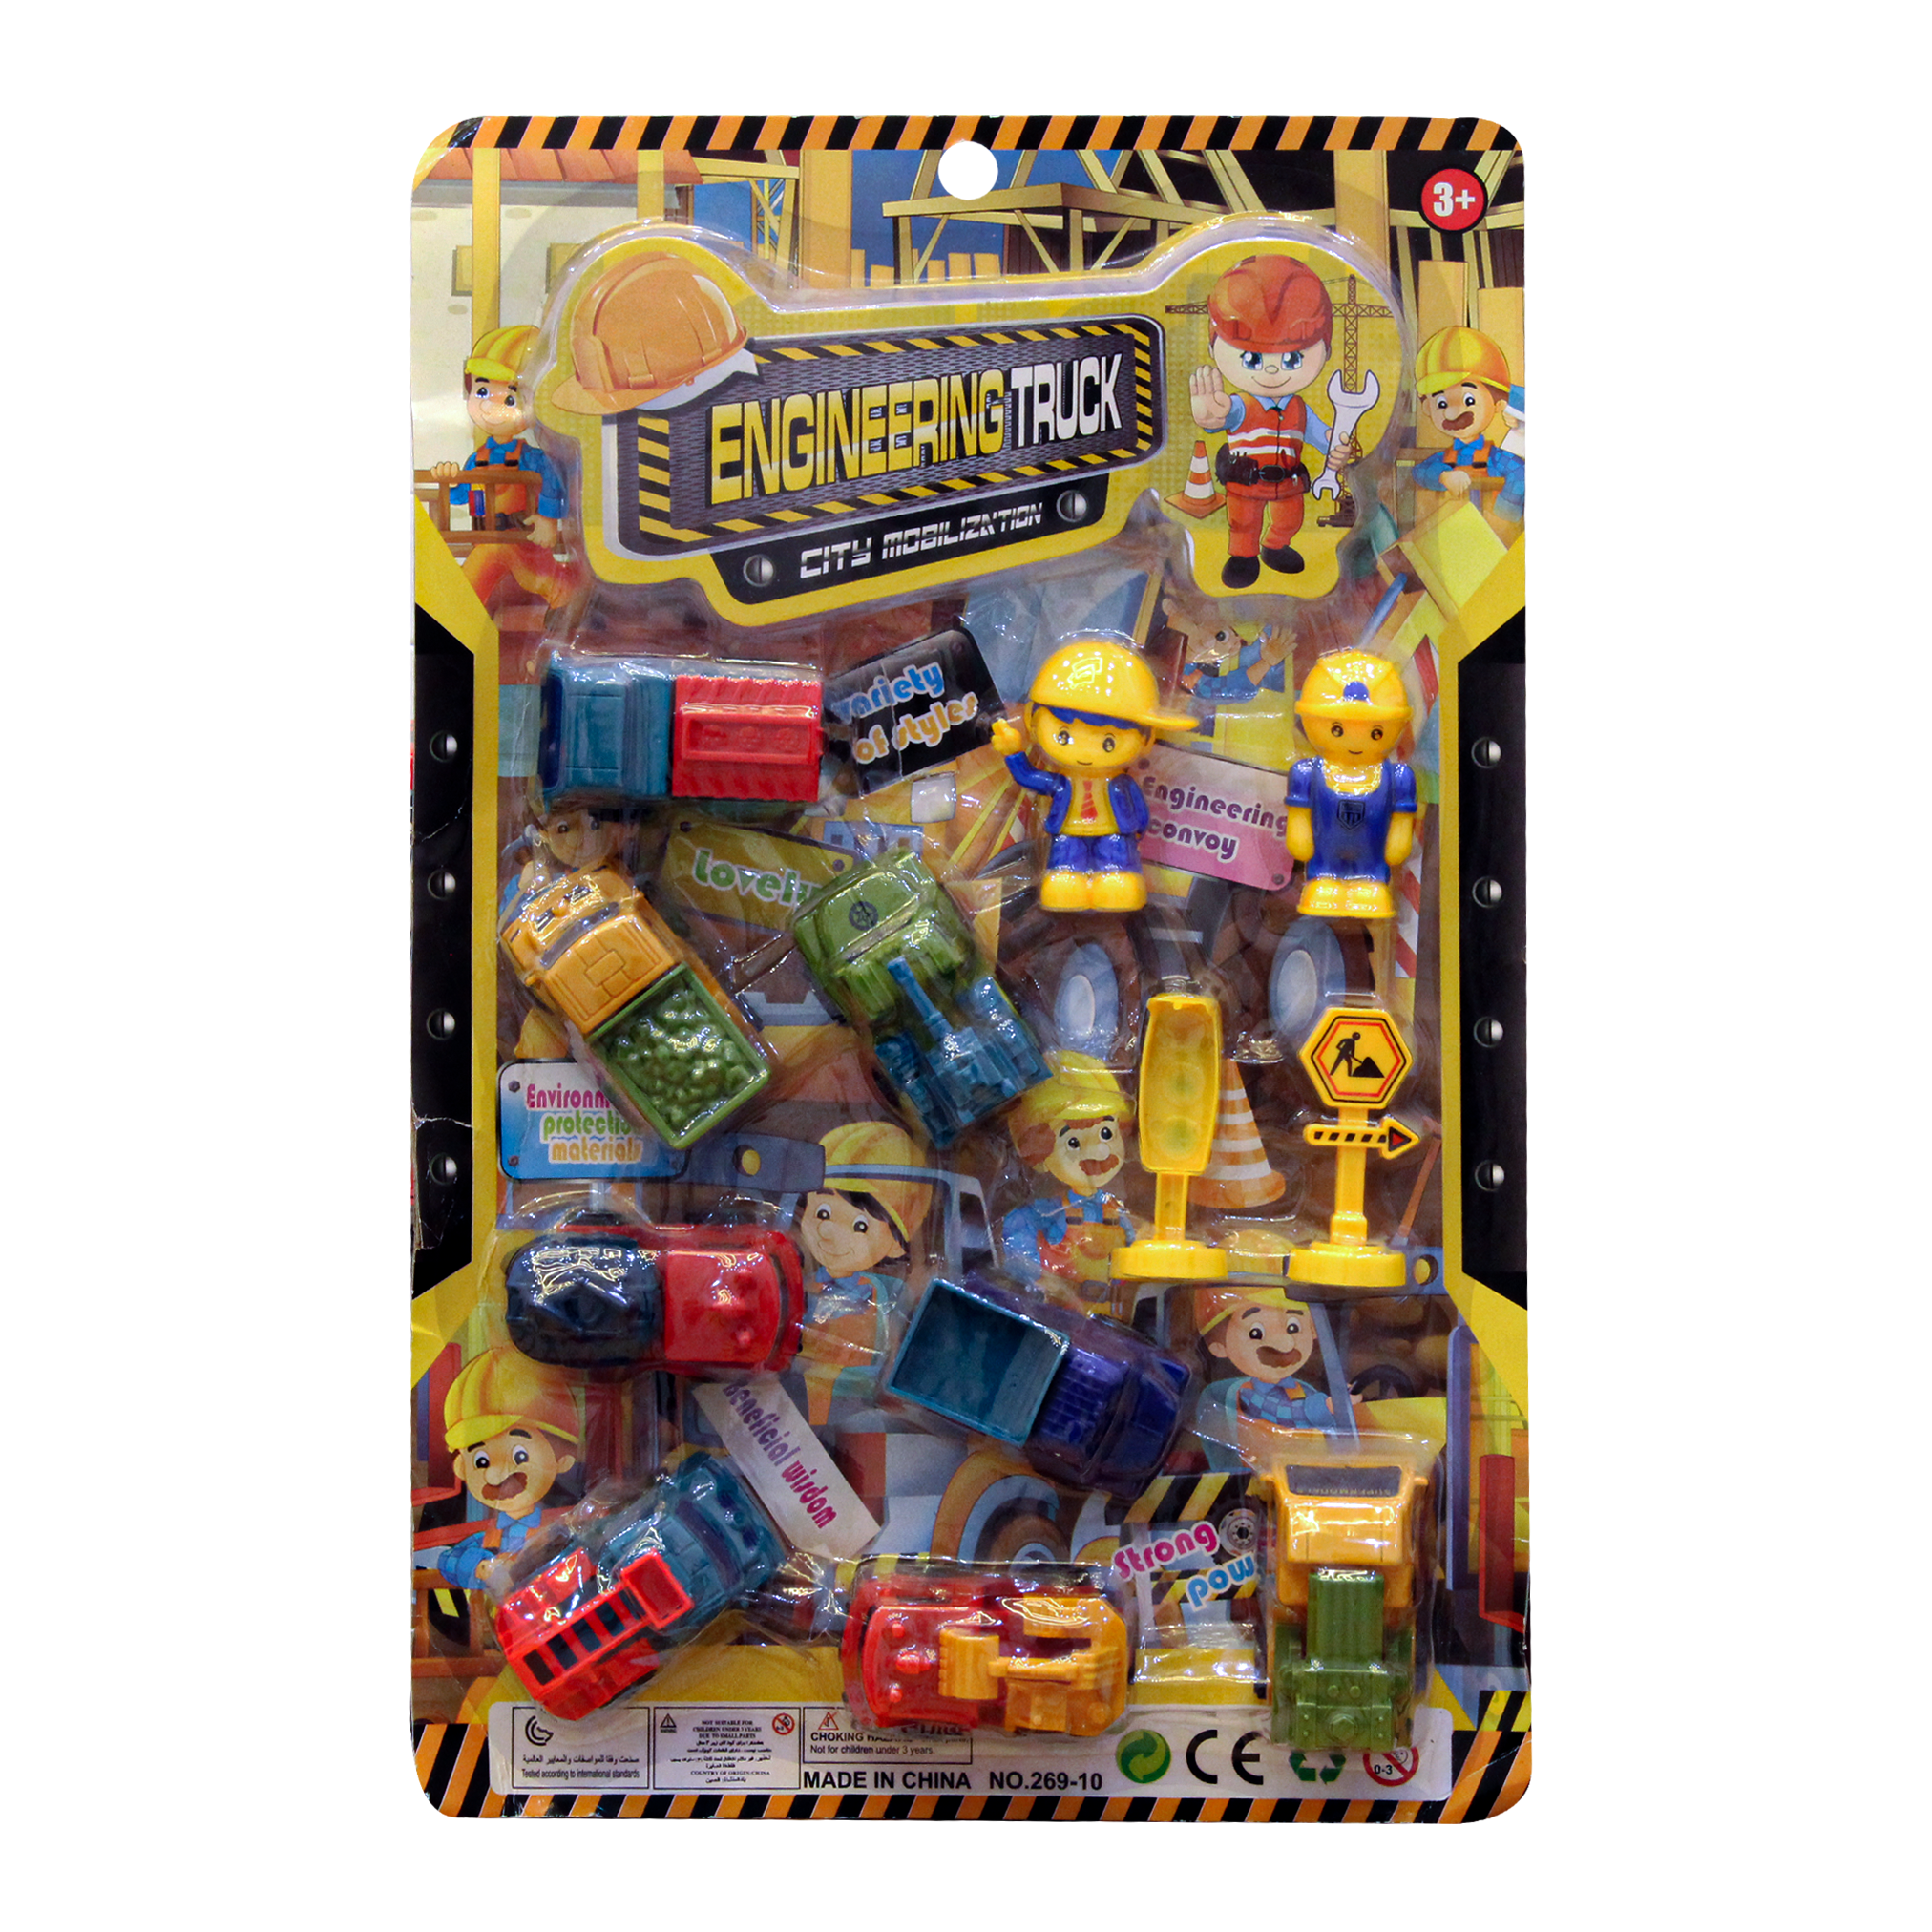 Engineering truck, consist of small trucks with small action figure ( 12 pieces)